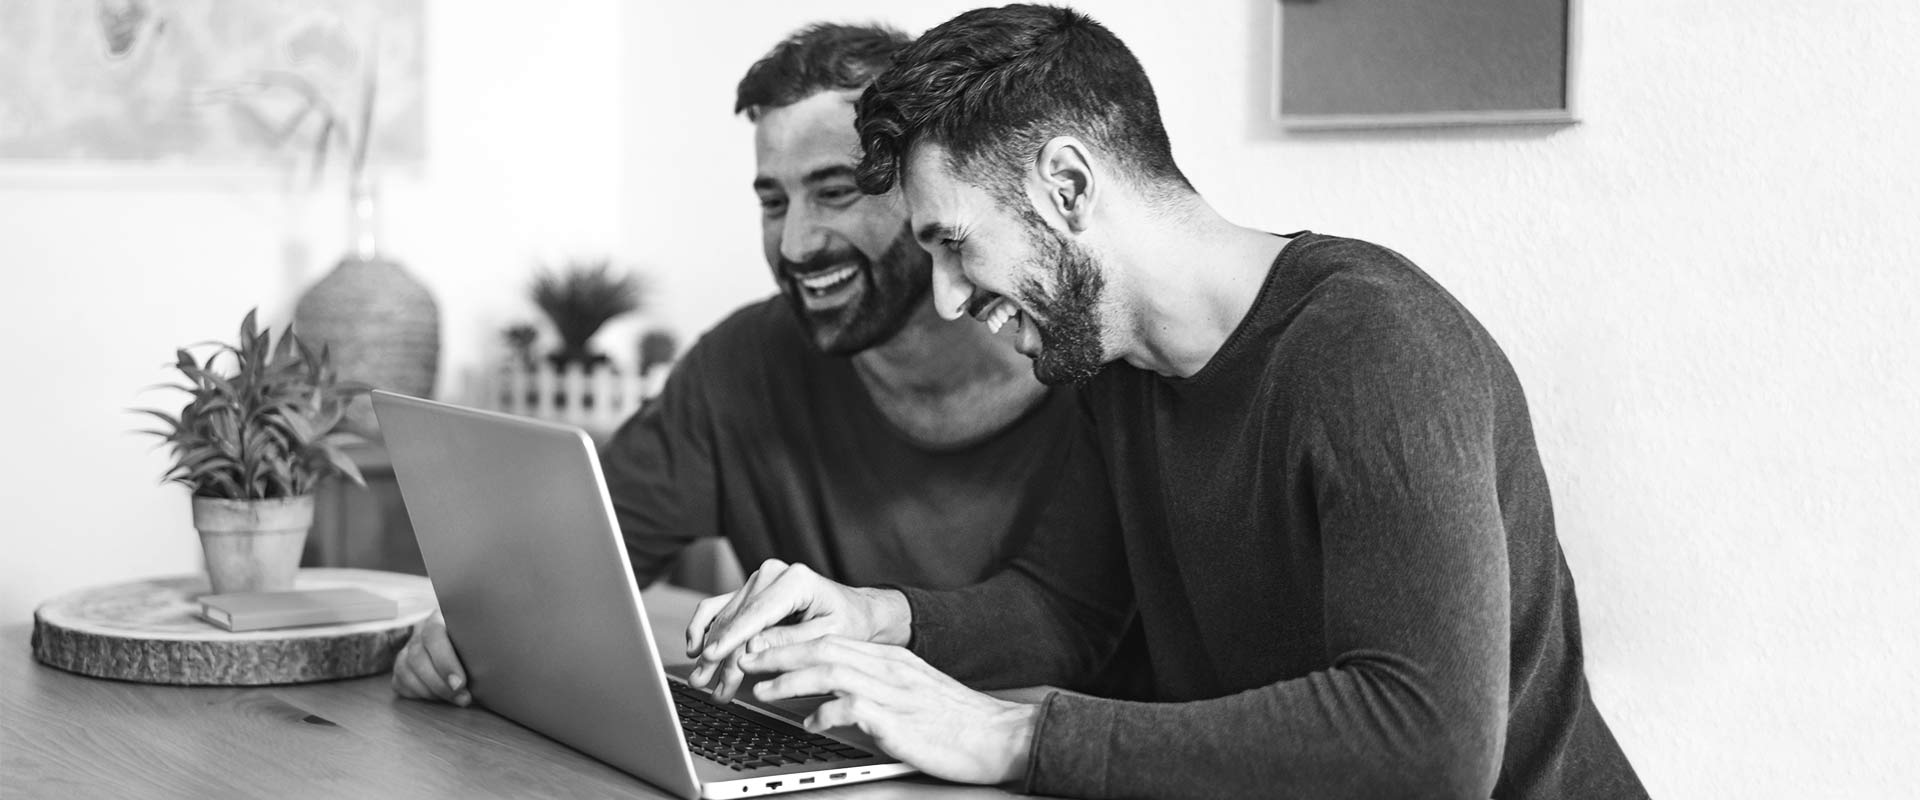 Two men smiling while chatting on the computer